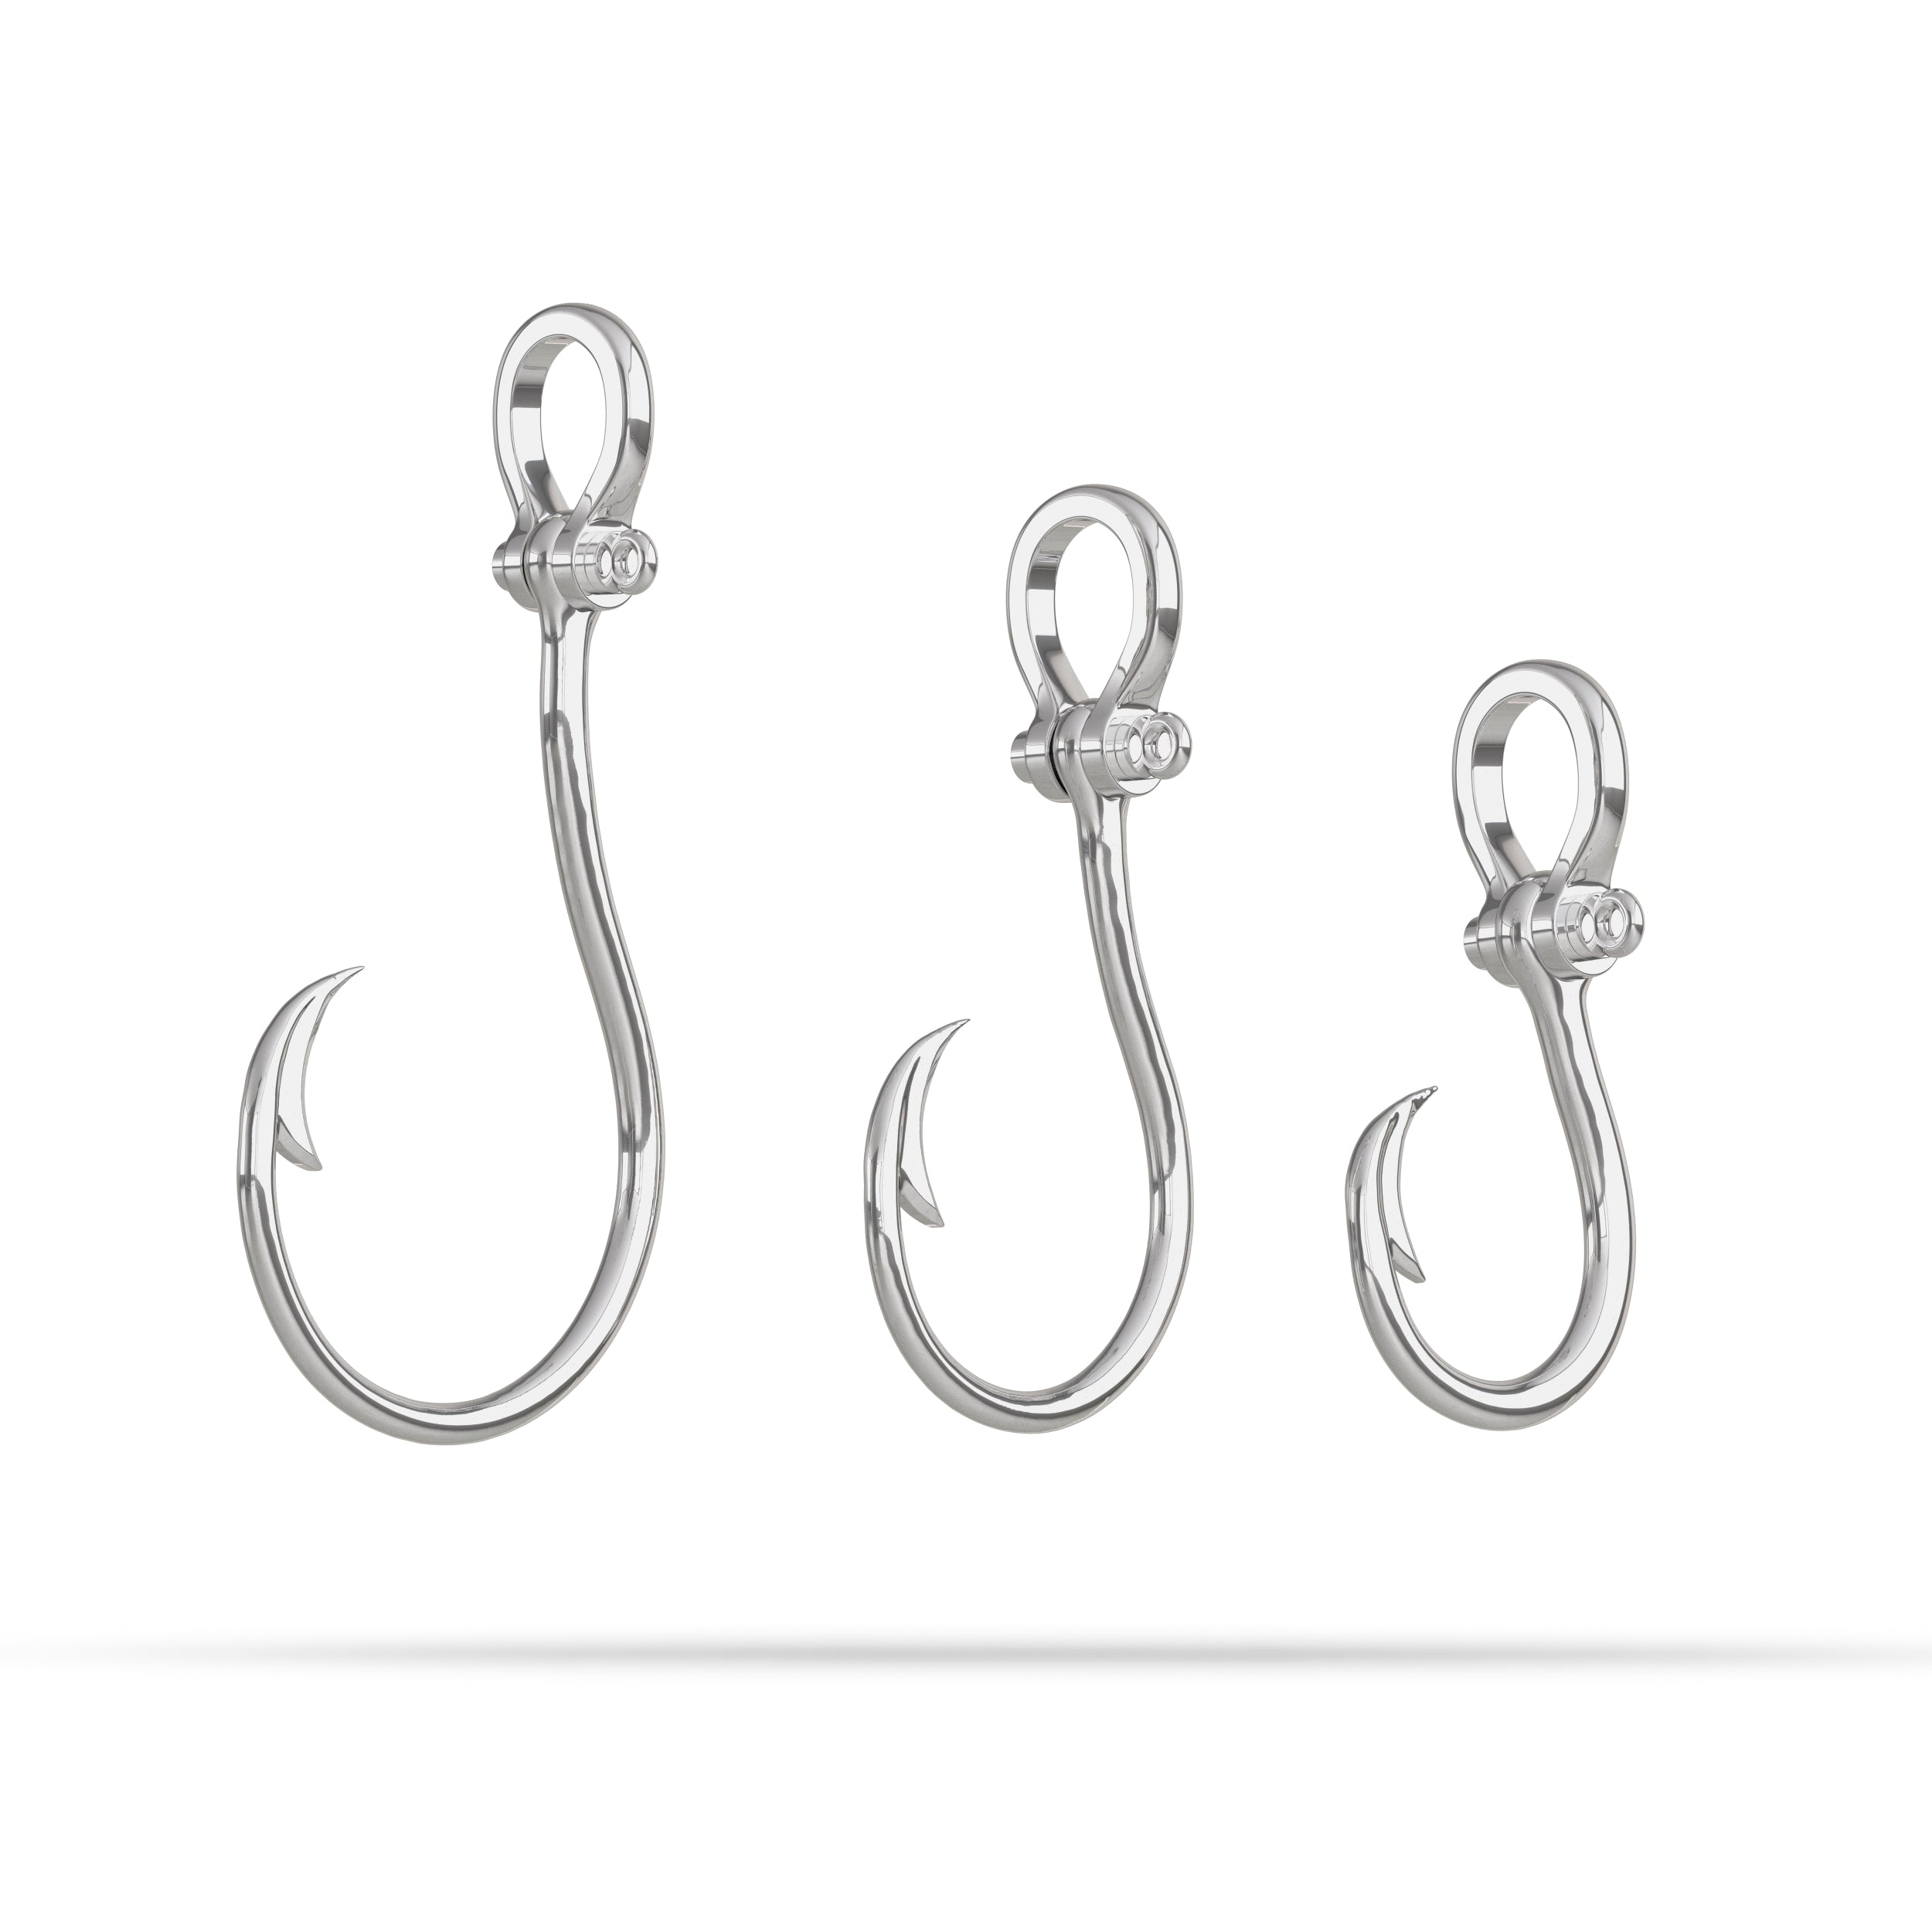 NP Supplies 10 Pcs Antique Silver Fish Hook Pendants , Fish Hook Charms, Fish Hook Necklaace ,Anchor Jewelry (NS649)